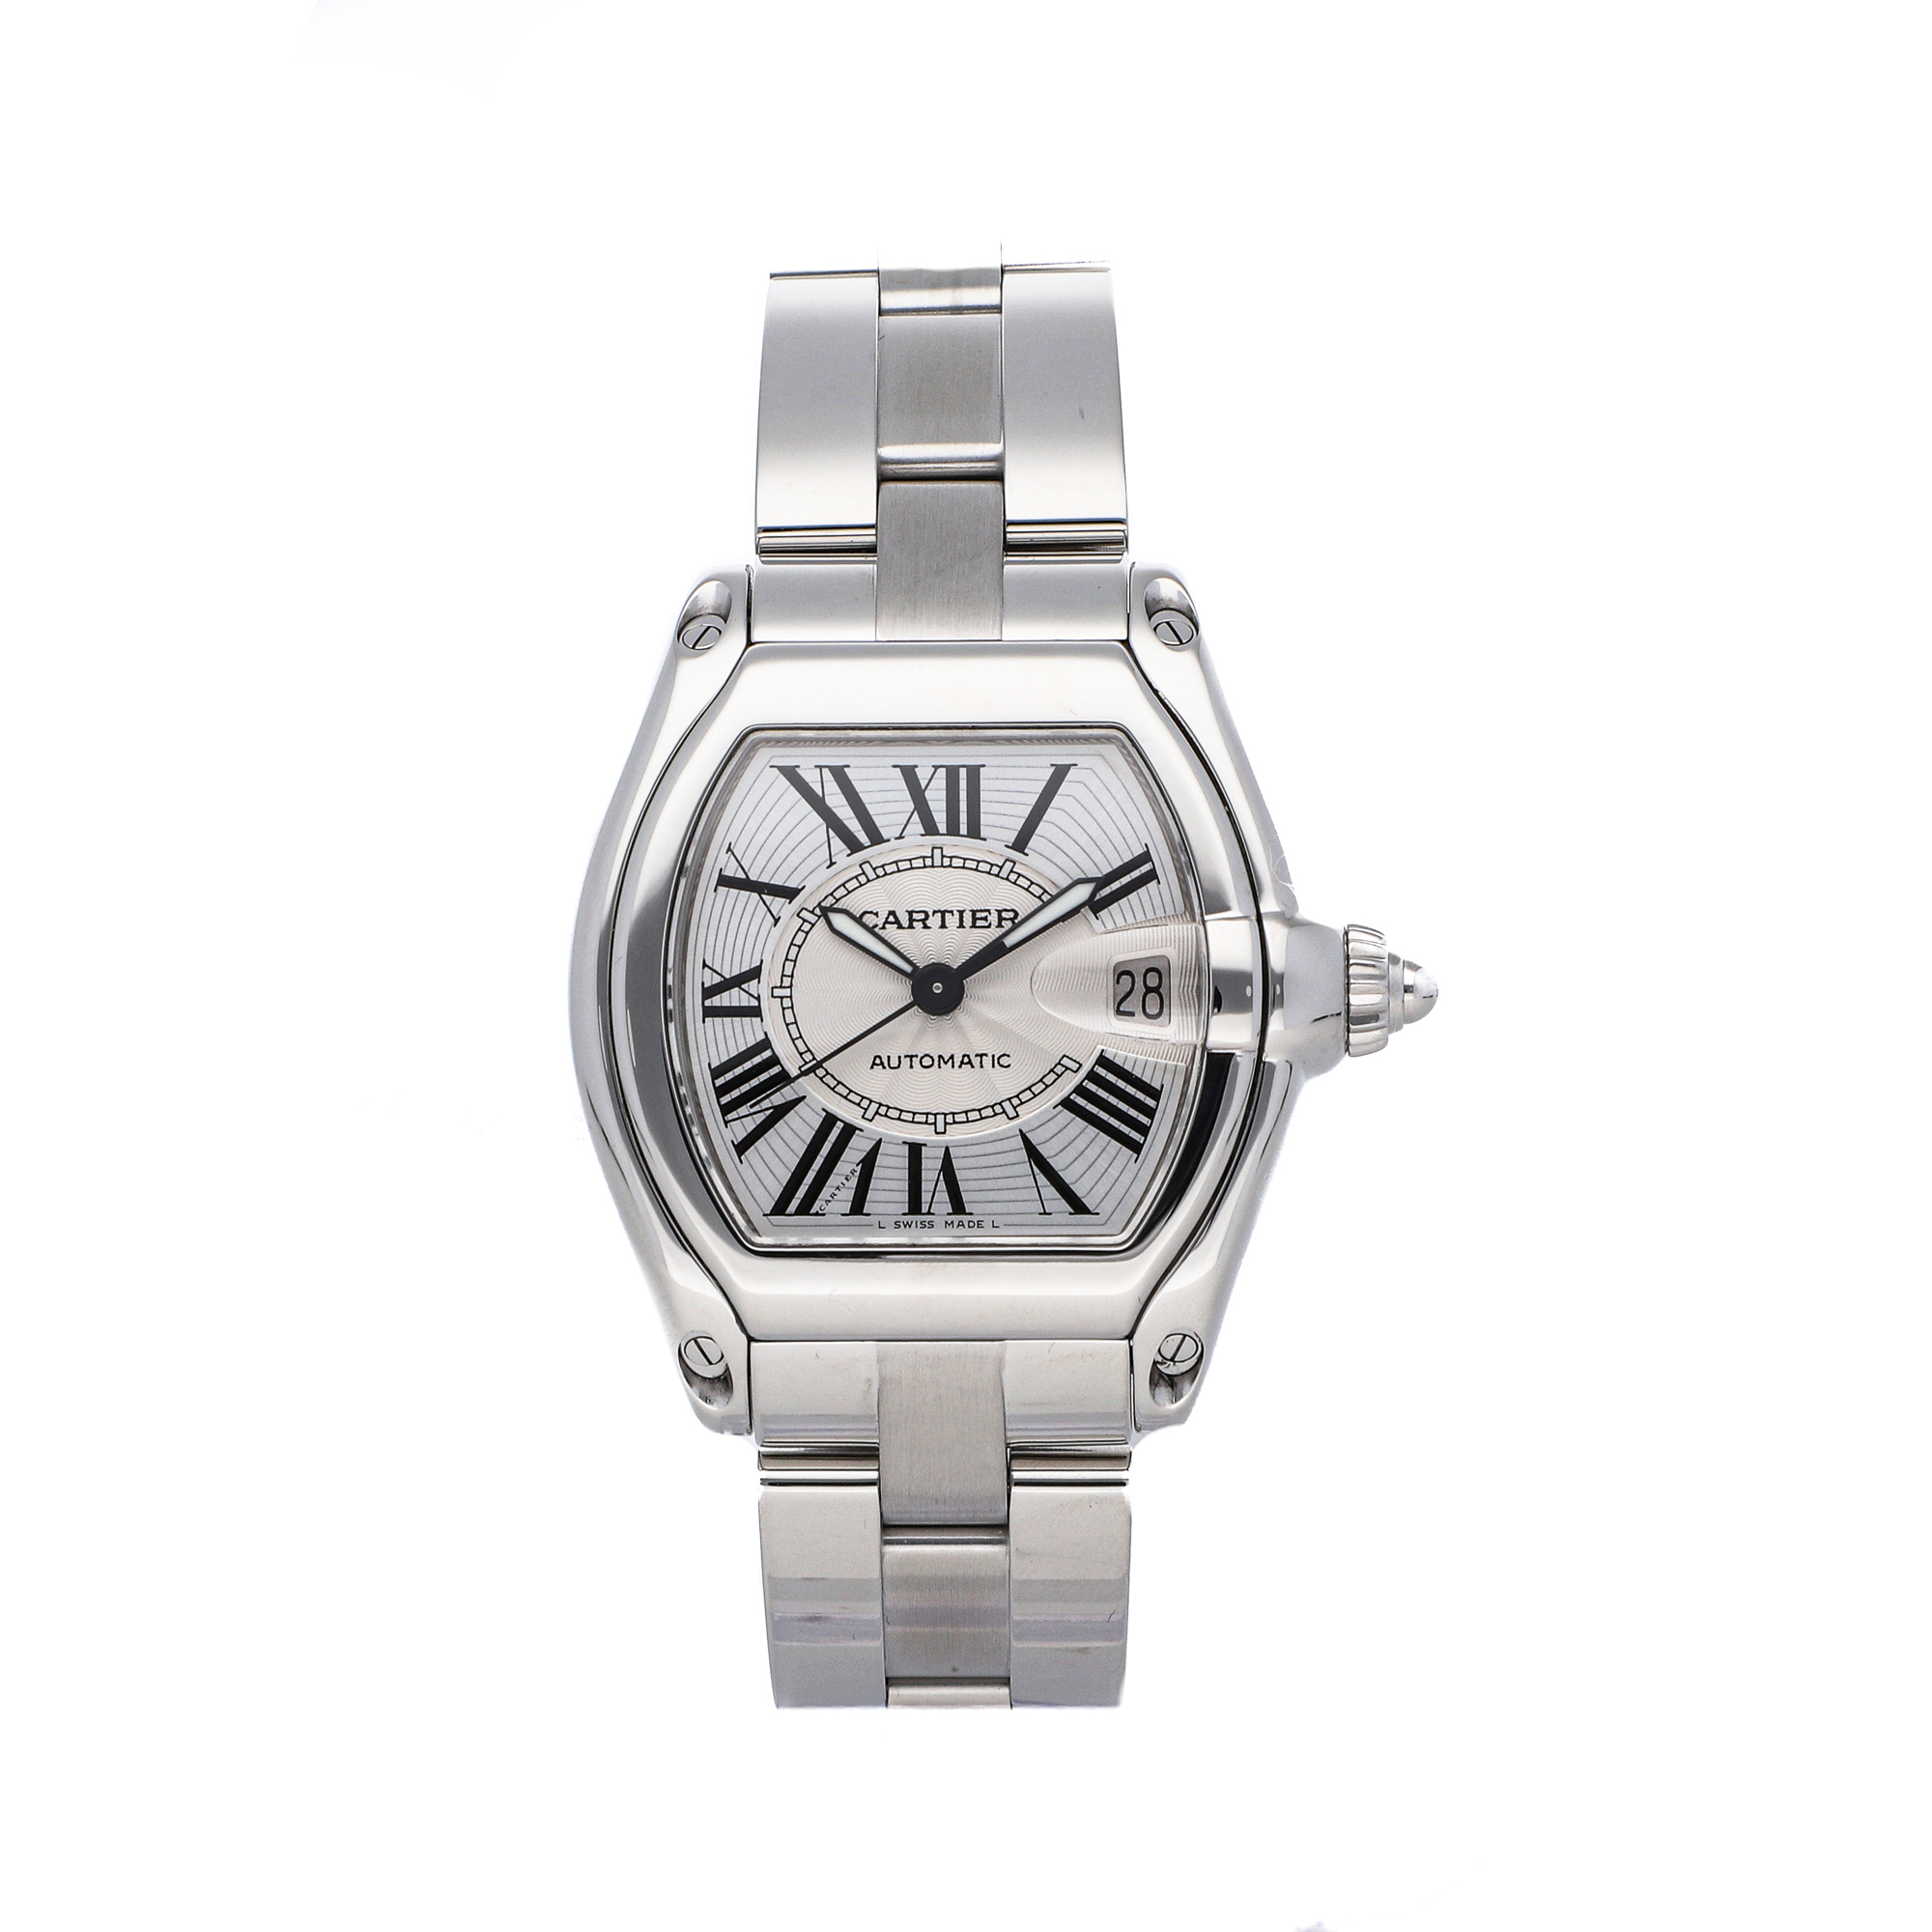 Certified Pre-Owned Cartier Roadster 